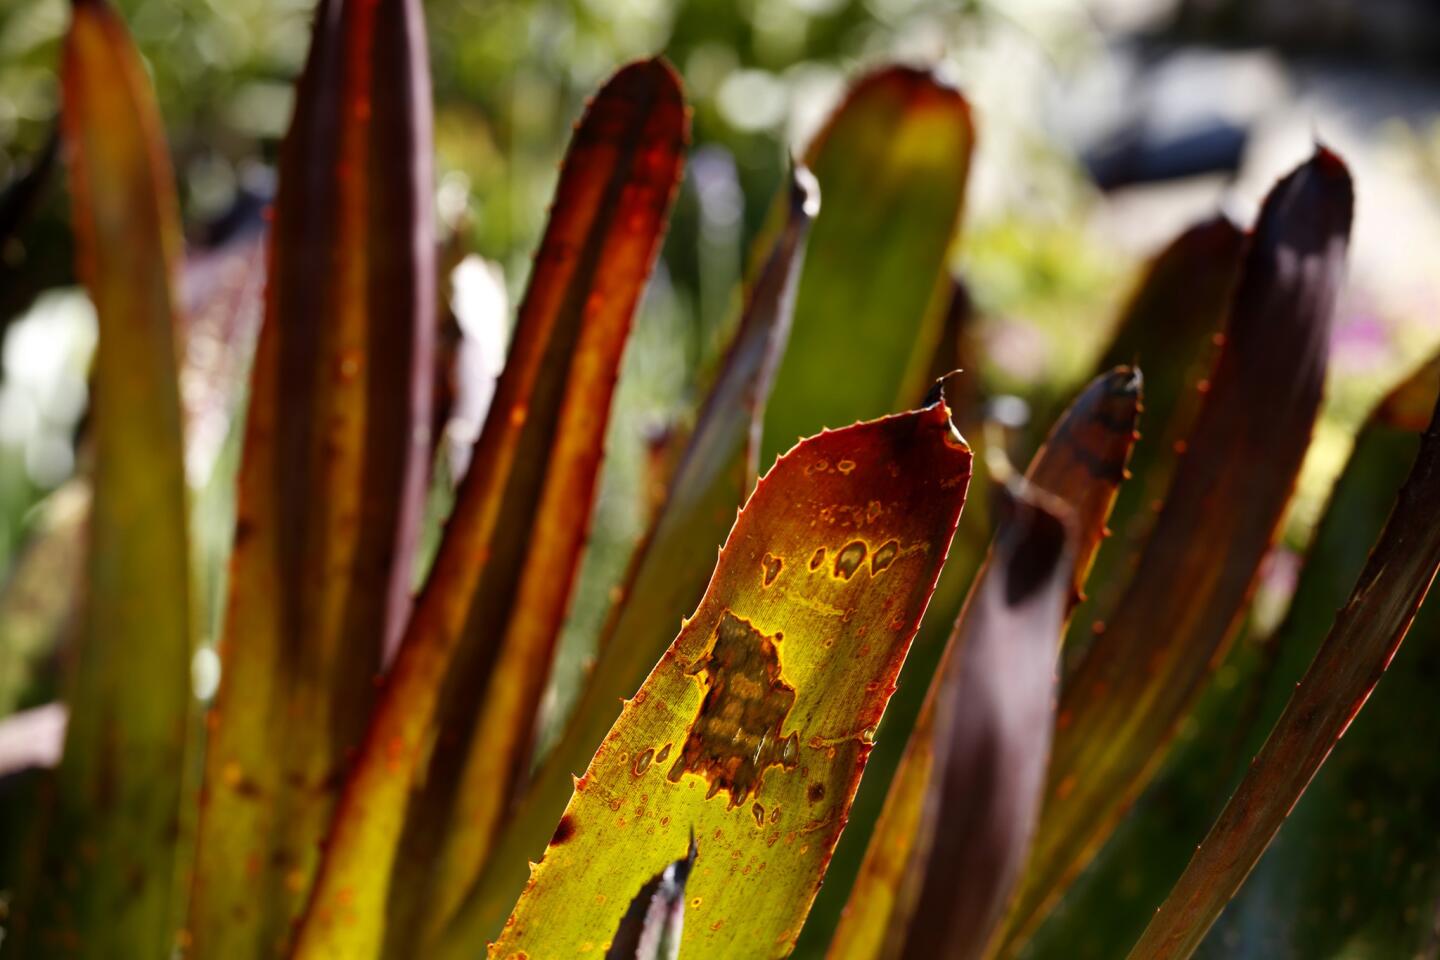 This Burbank drought garden is anything but dull